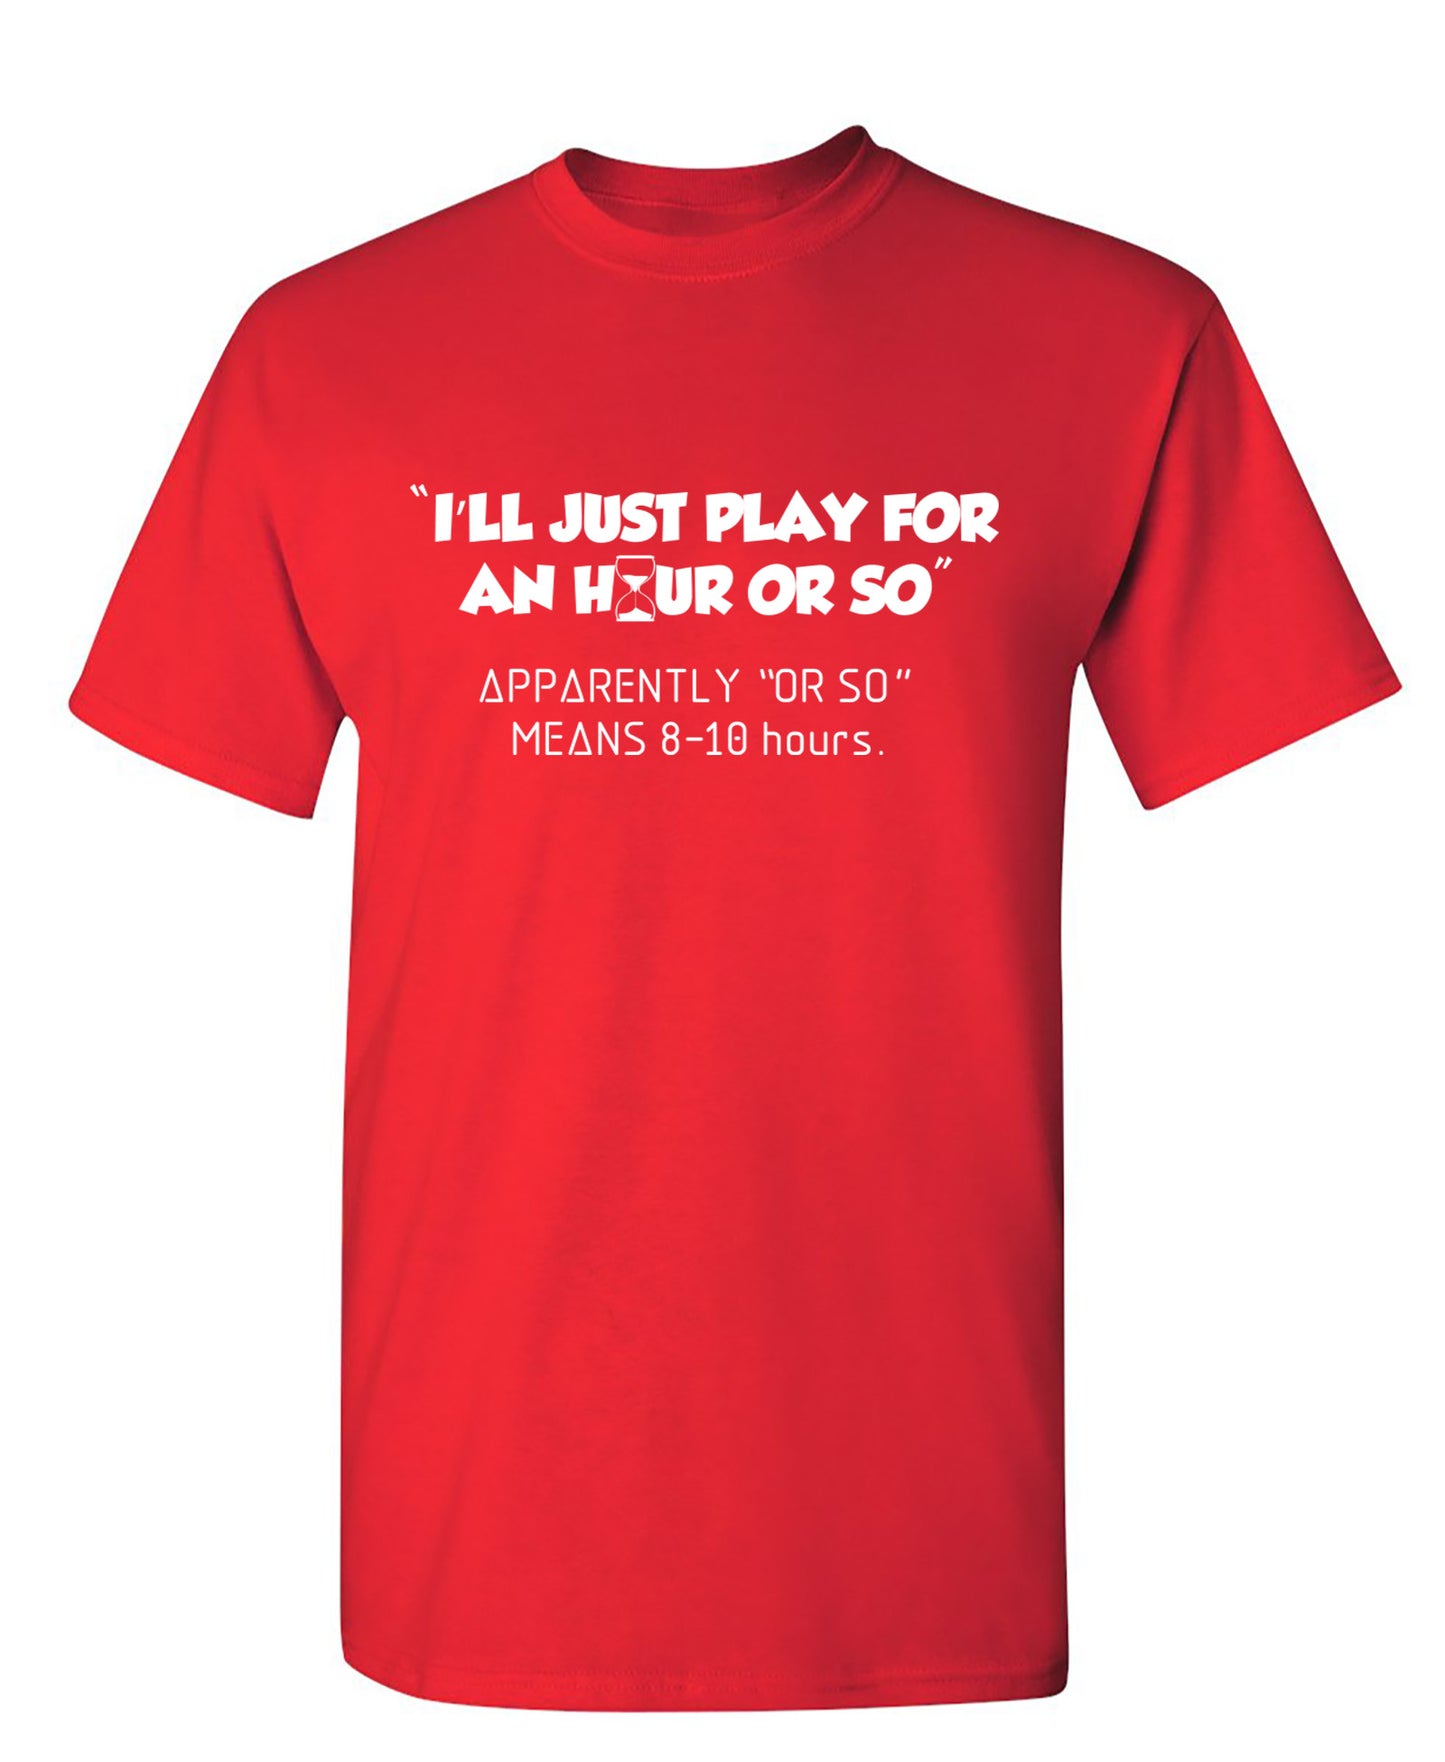 I'll Just Play For An Hour Or So - Funny T Shirts & Graphic Tees